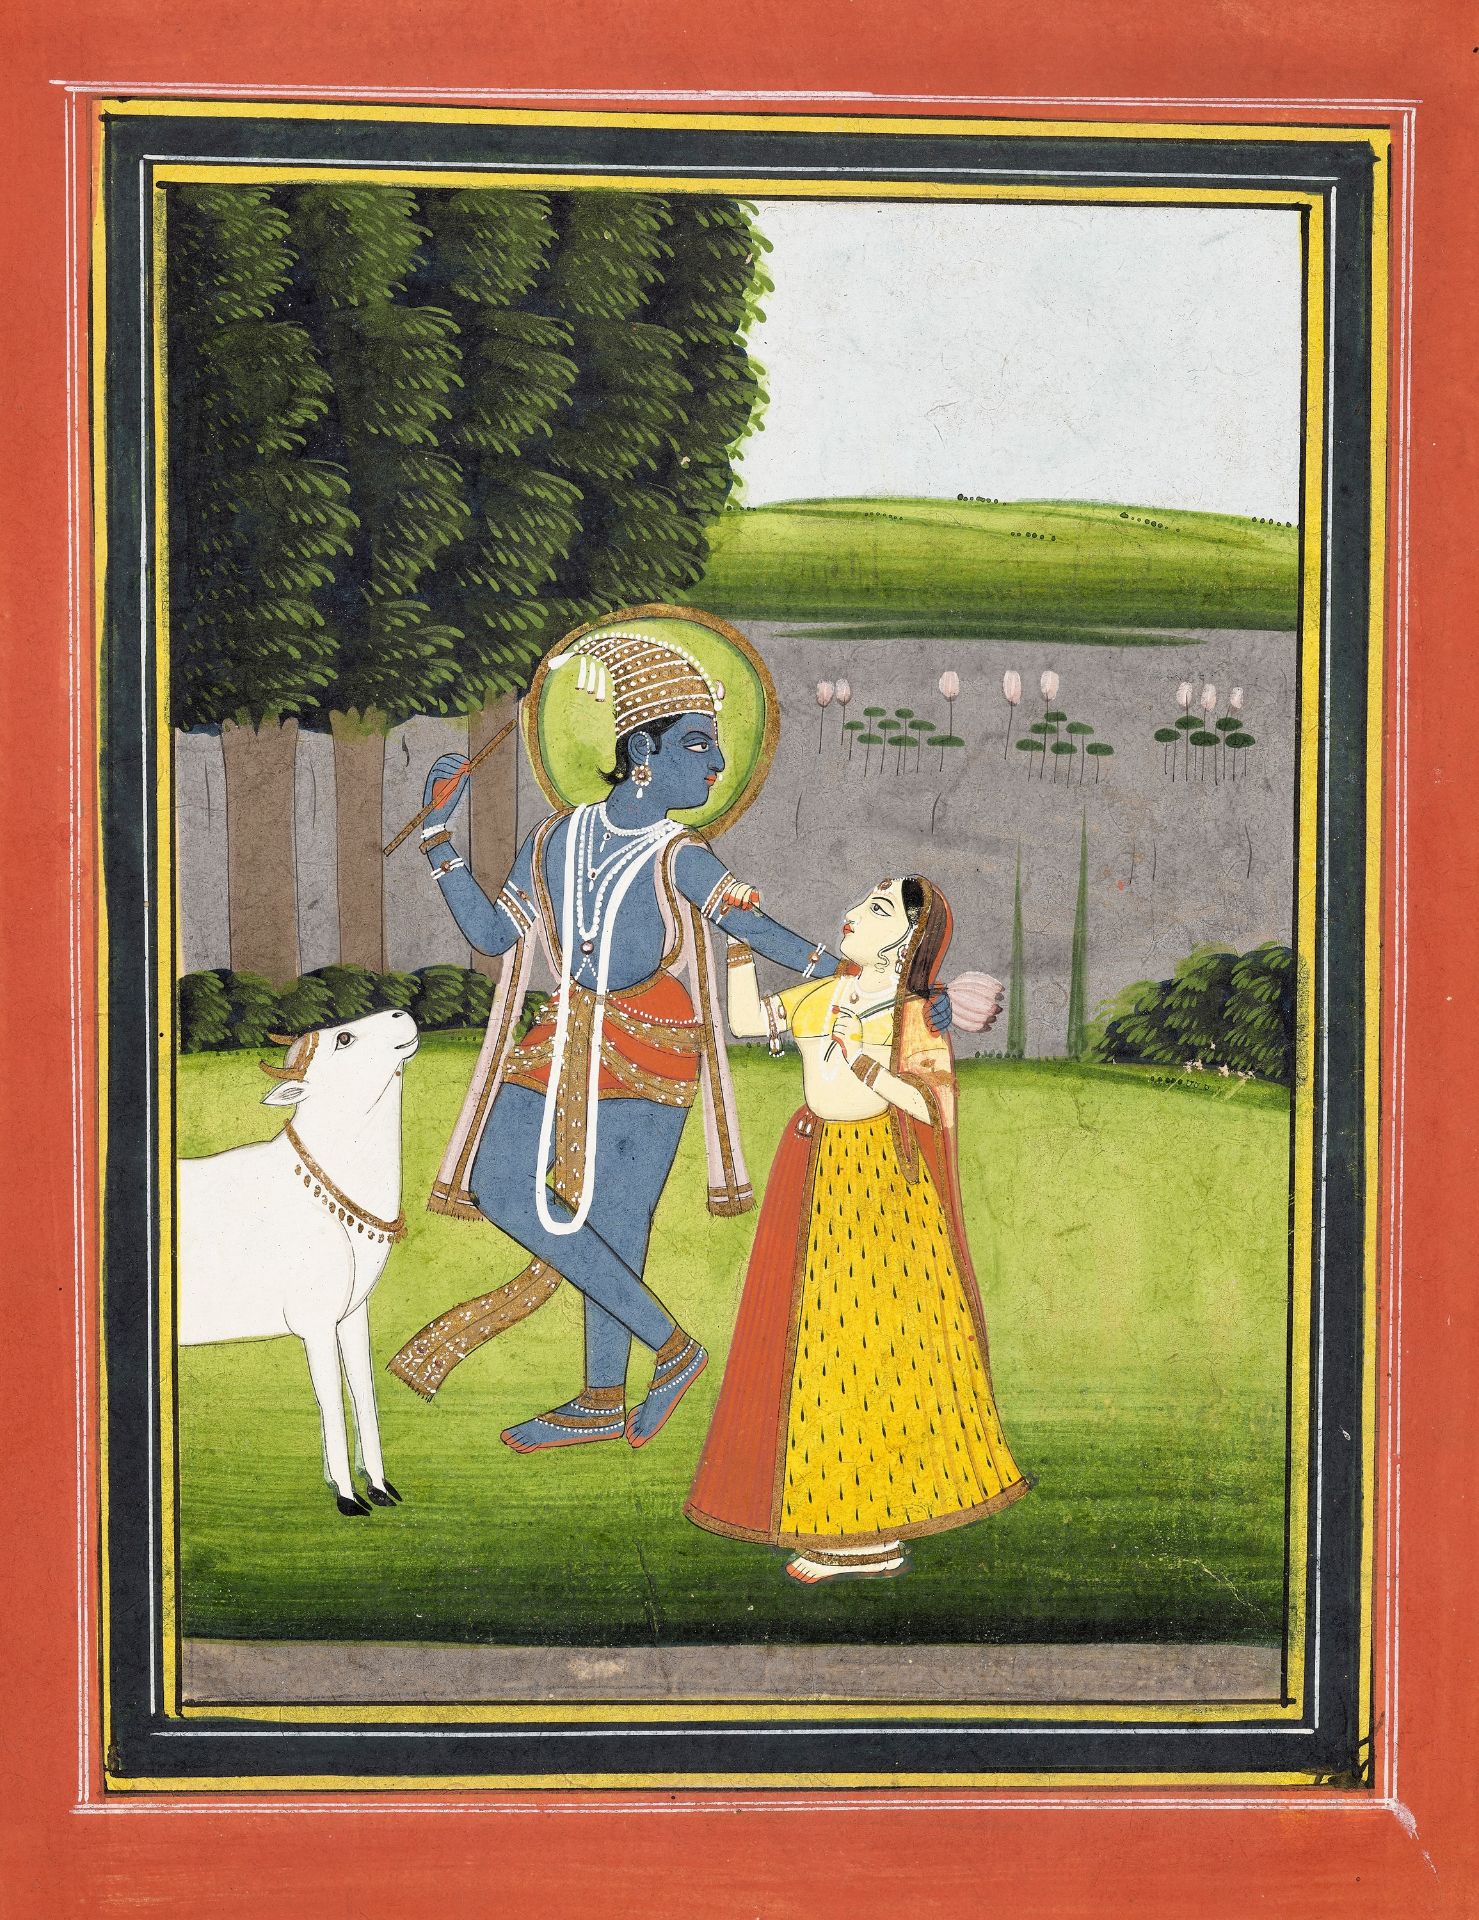 AN INDIAN MINIATURE PAINTING OF KRISHNA AND RADHA BY THE YAMUNA RIVER